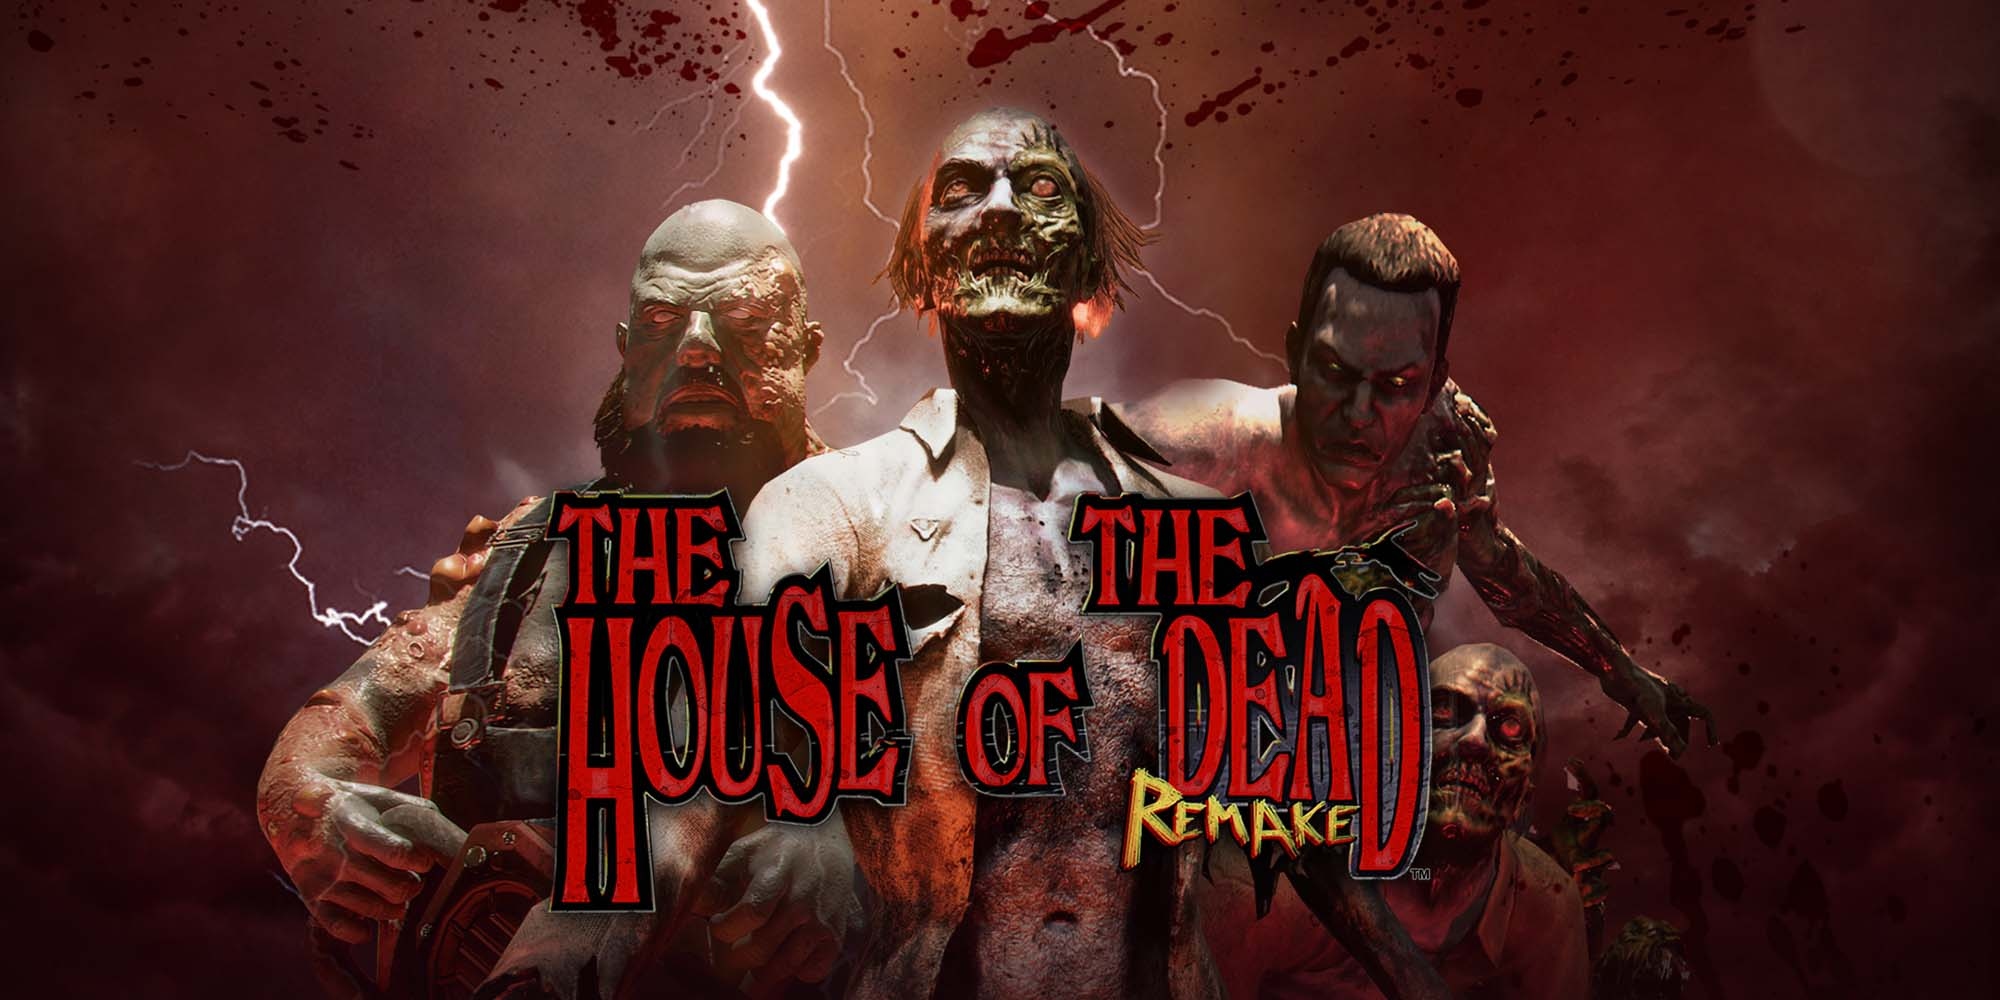 The House of the Dead: Remake Will Be Coming to PS5